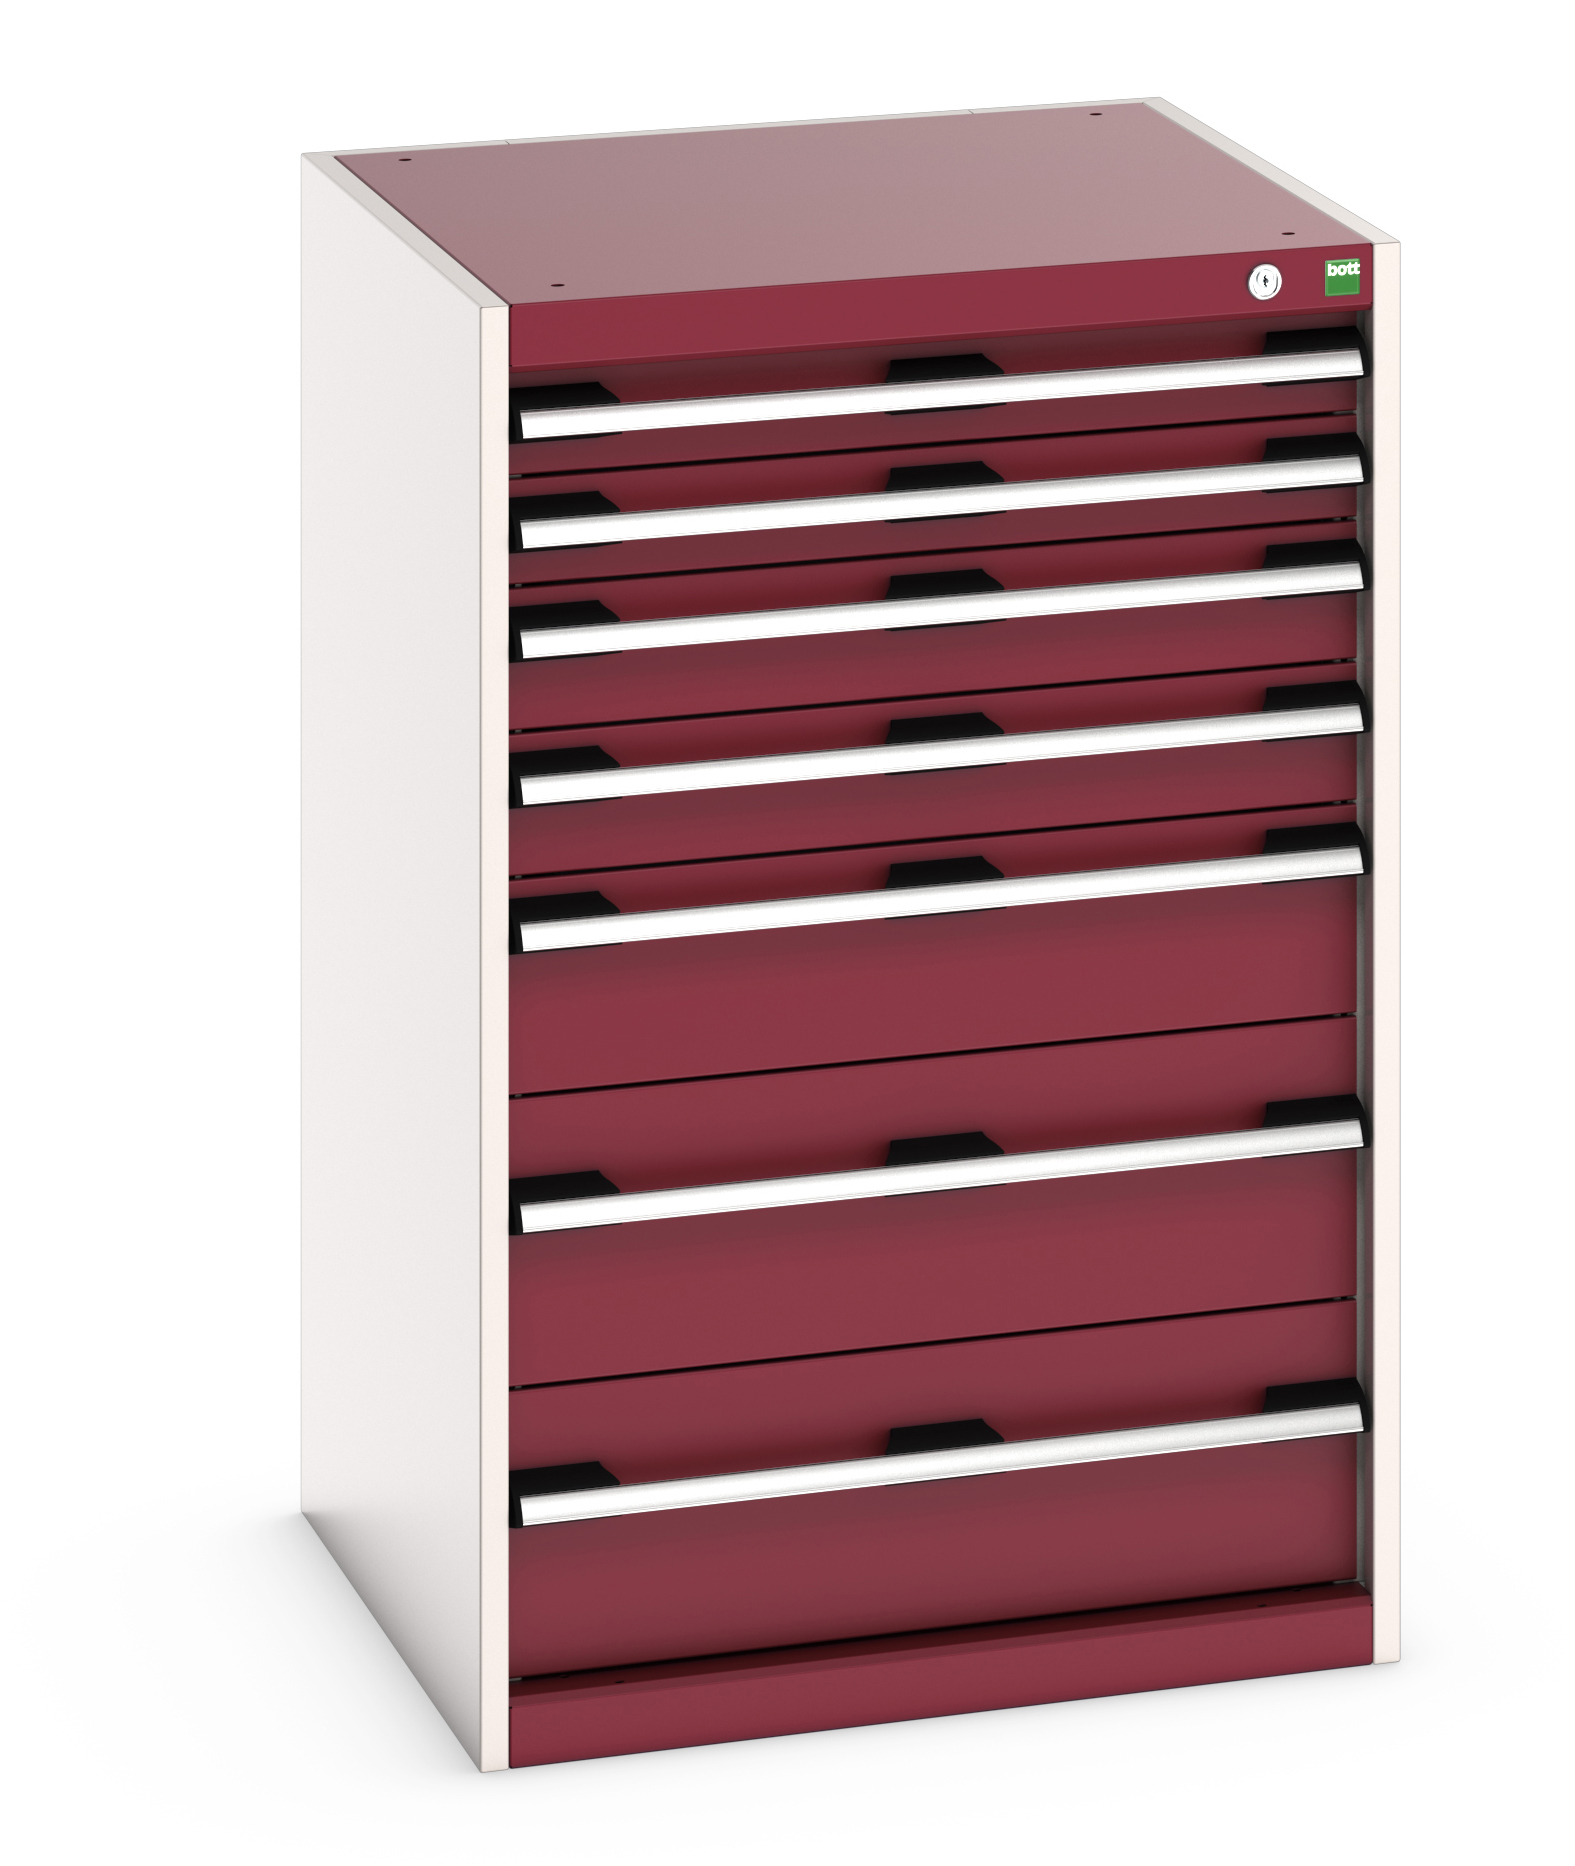 Bott Cubio Drawer Cabinet With 7 Drawers - 40019063.24V